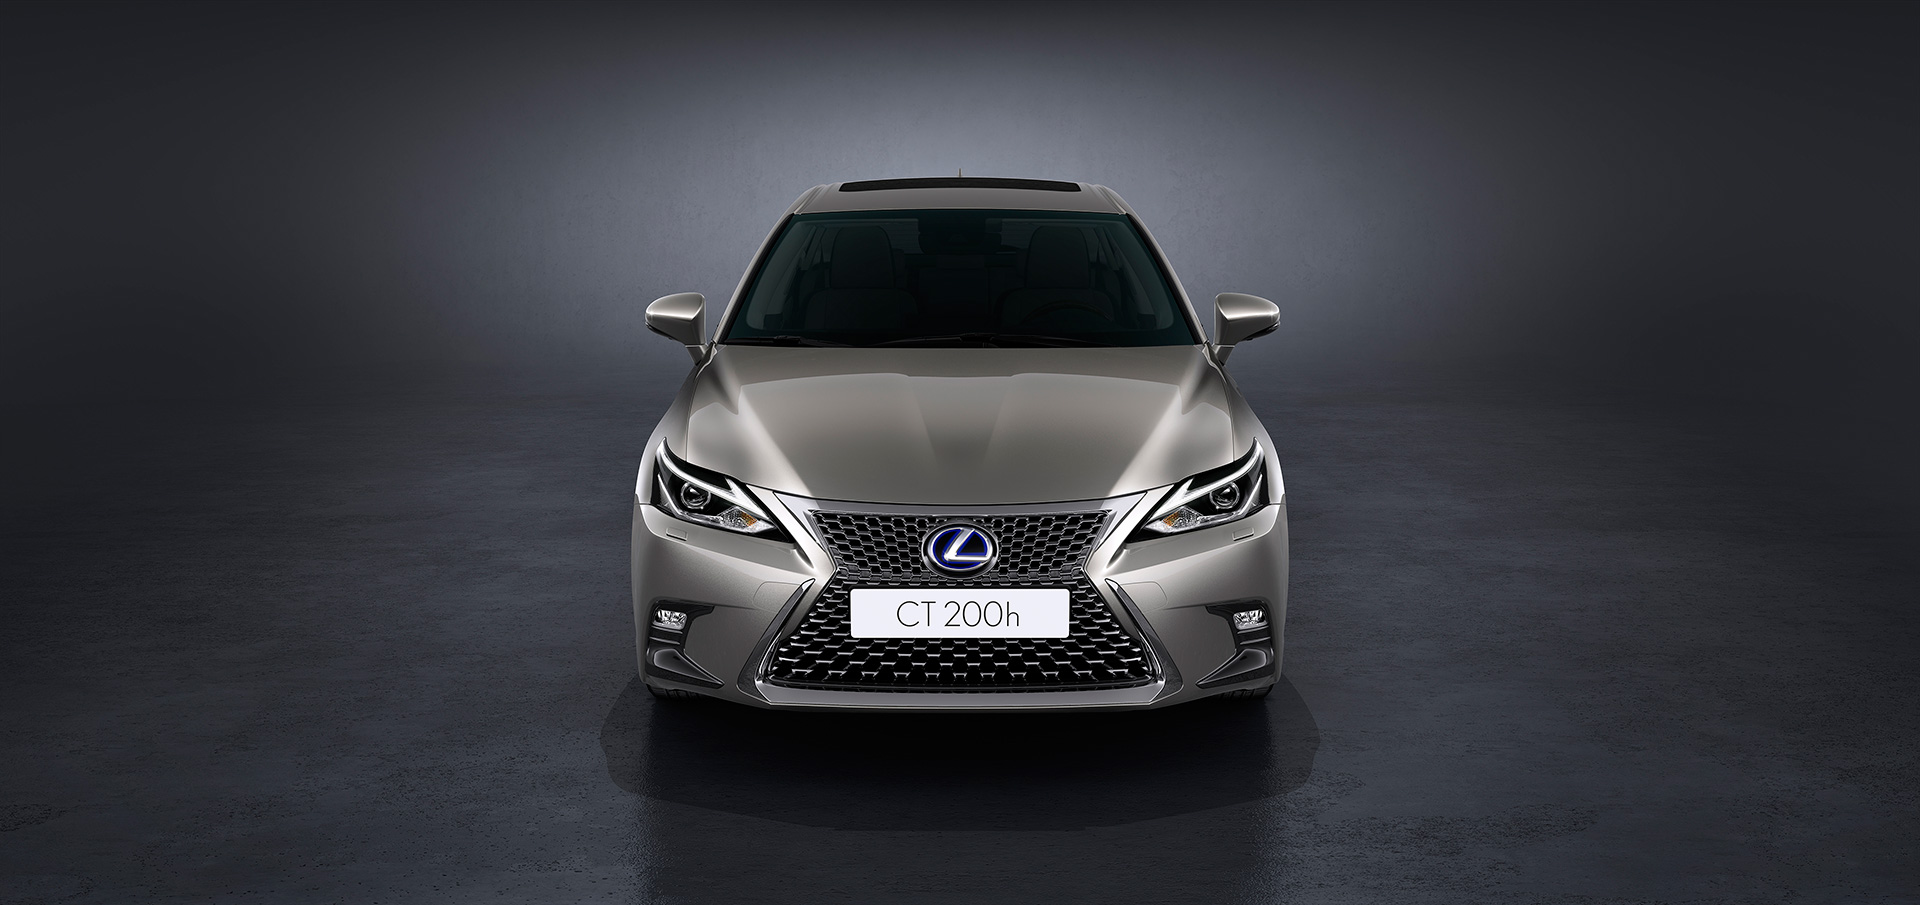 Minor Change 2018 Lexus Ct 200h Evolves With Sportier Styling Interior Updates Innovative Lexus Safety System Lexus Global Newsroom Toyota Motor Corporation Official Global Website